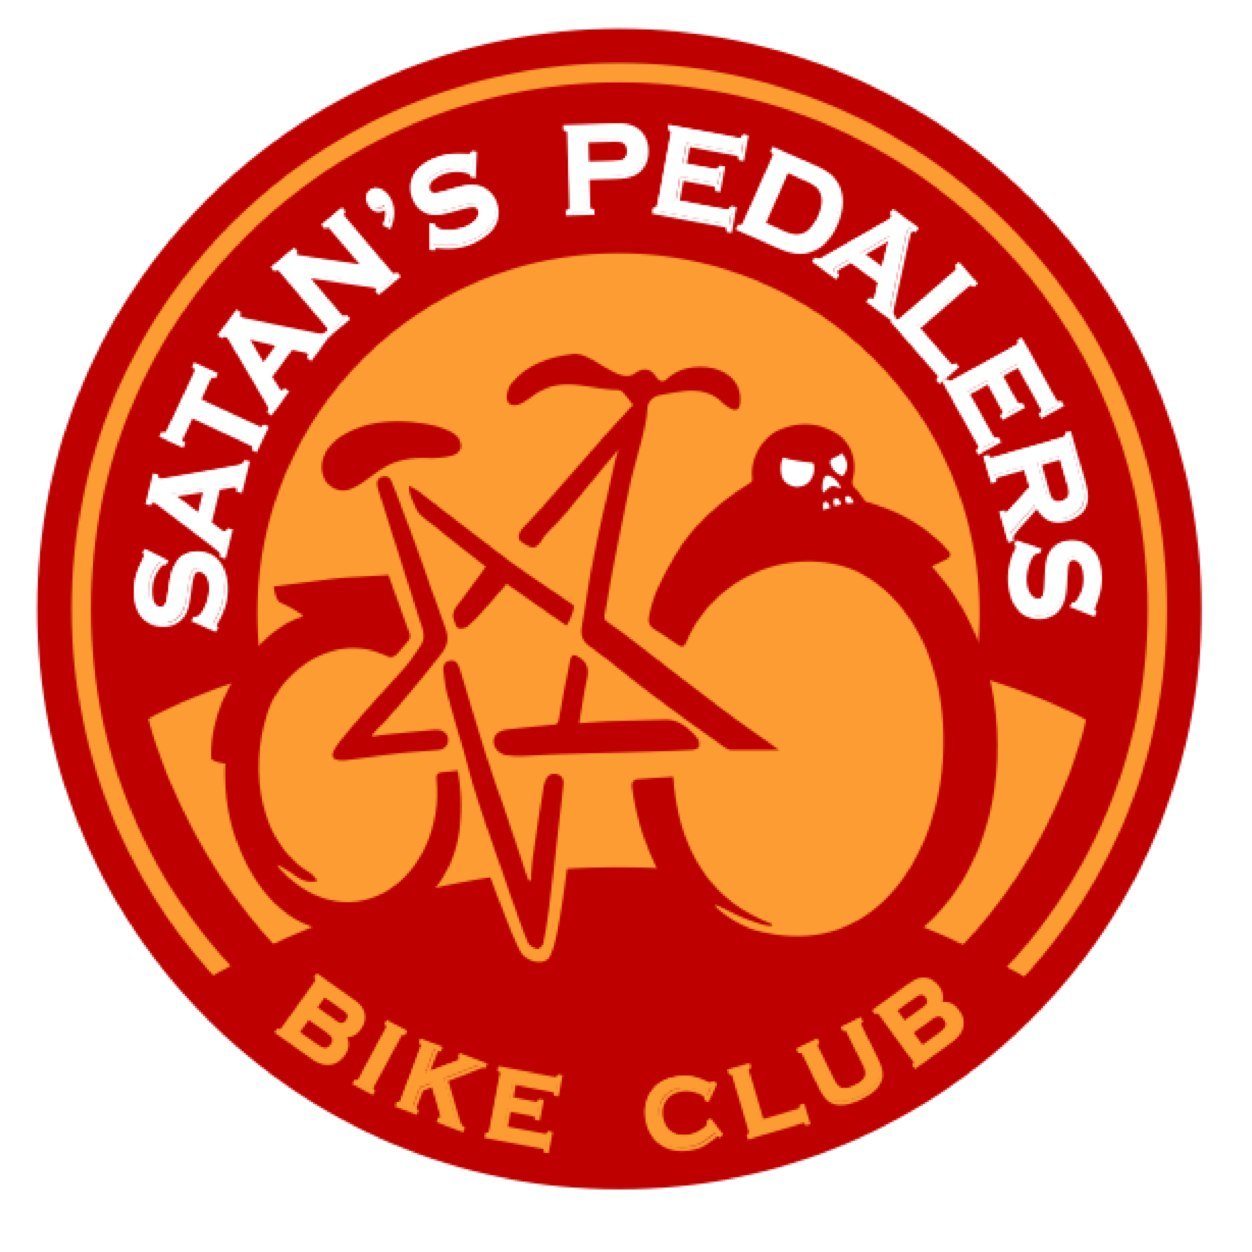 Satan's Pedalers - a rogue outdoor sports group seeking the next adventure. No official affiliation with the devil. Did see a chupacabra once.